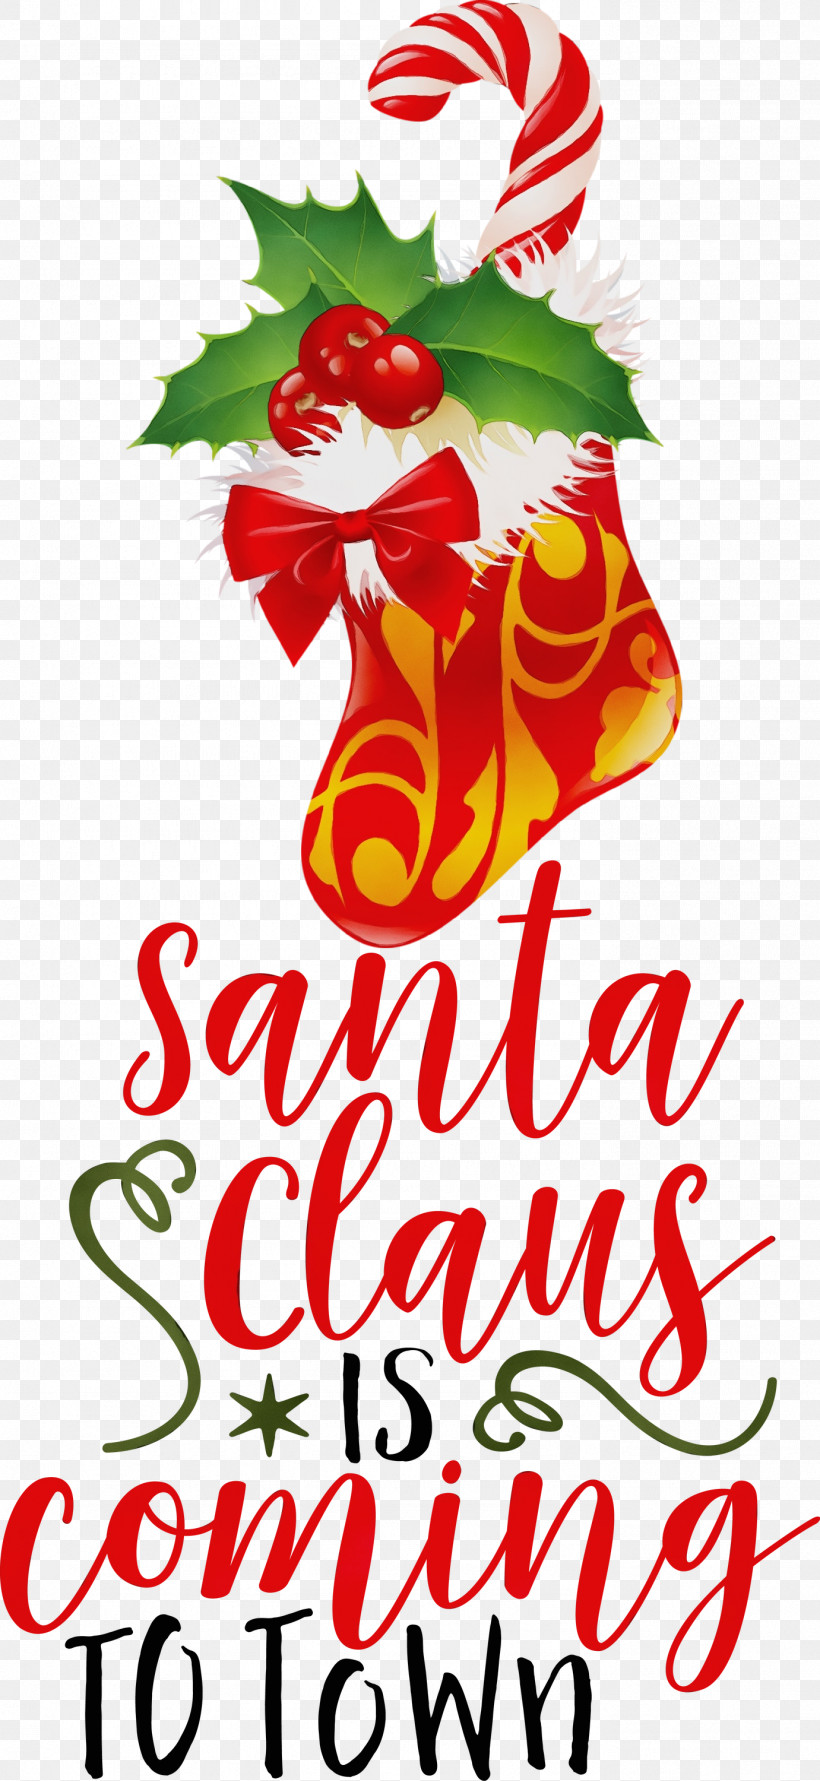 Floral Design, PNG, 1381x3000px, Santa Claus Is Coming, Christmas, Christmas Day, Christmas New Year Greetings, Floral Design Download Free